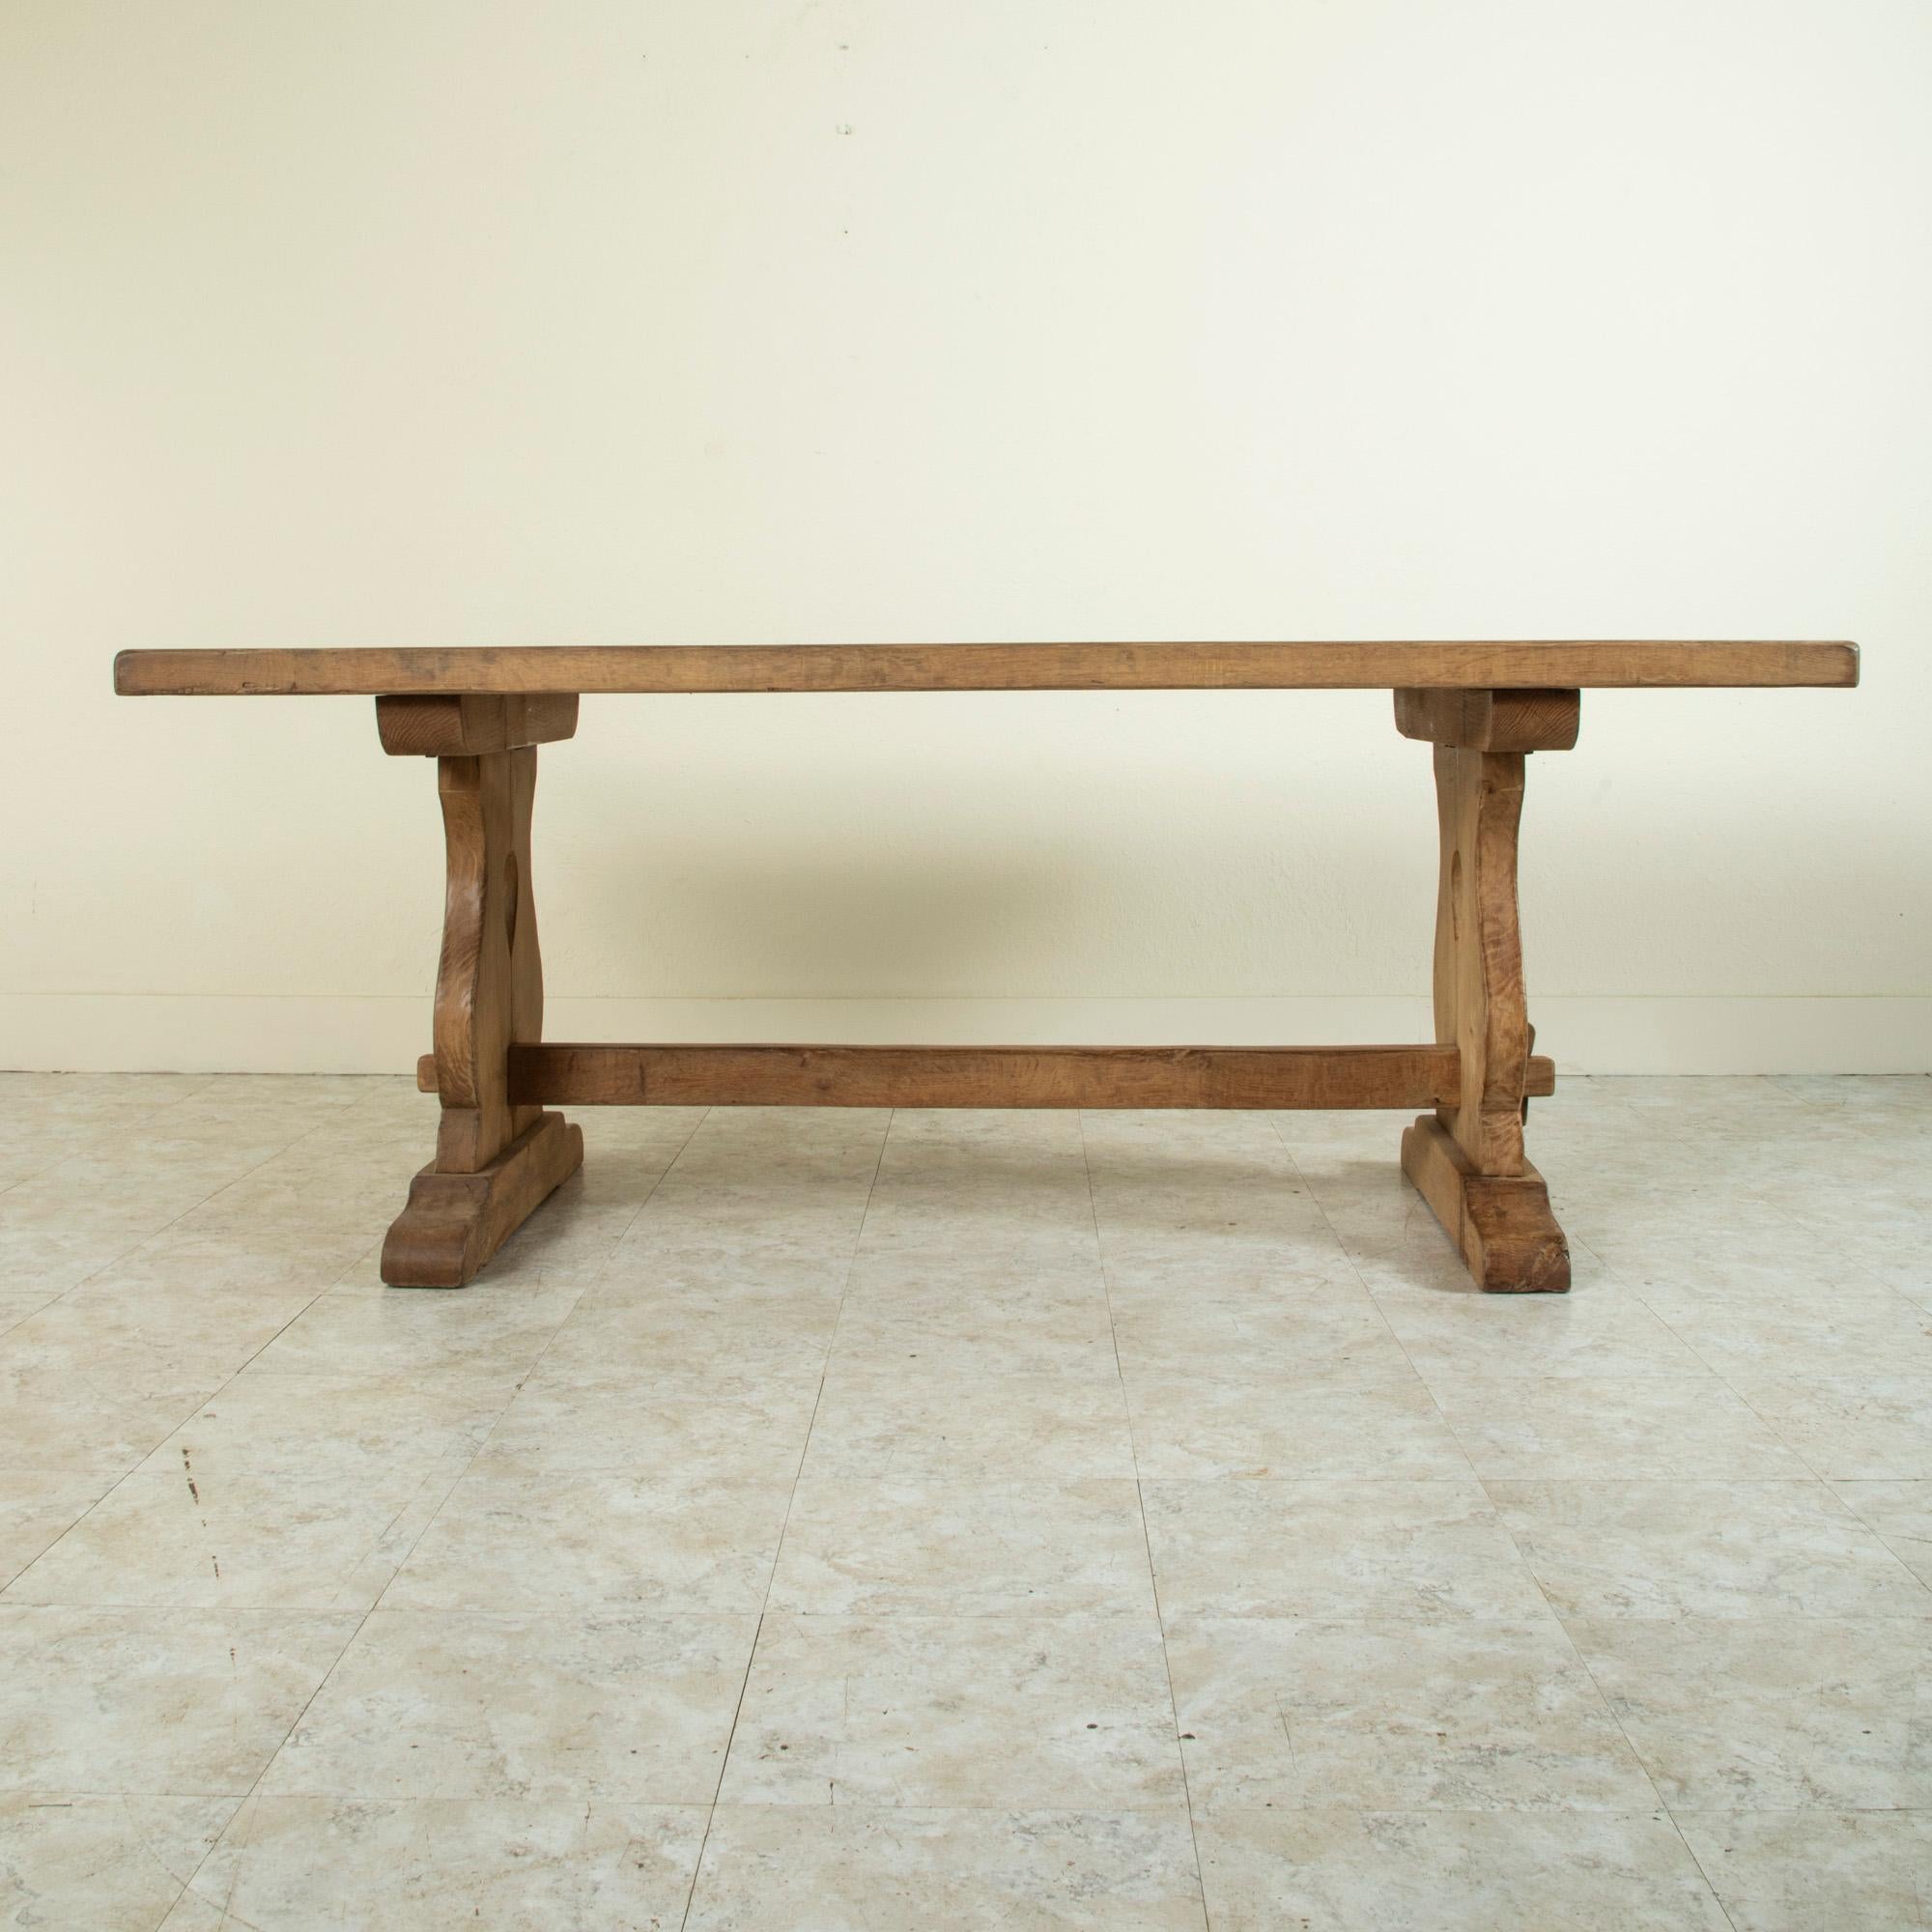 20th Century French Bleached Oak Normandy Monastery Table, Farm Table, Trestle Table, C. 1900